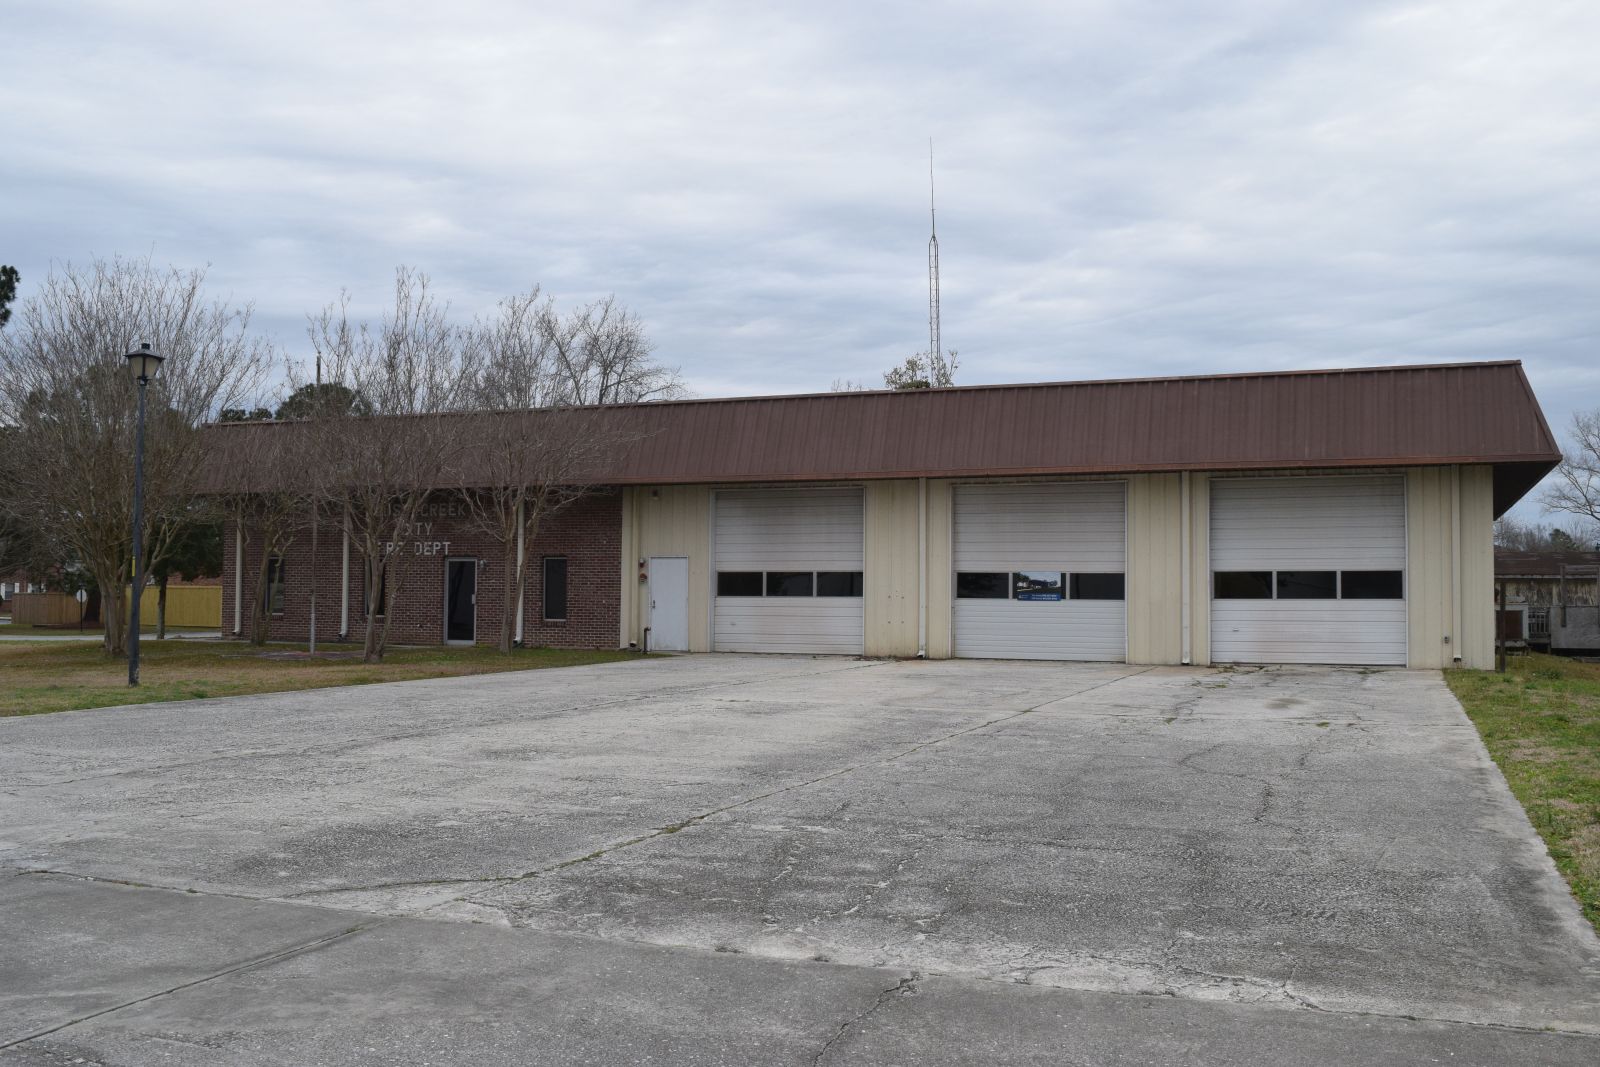 One major location for possible investment in Goose Creek is the former fire station on Button Hall Avenue, which is under contract with the real estate company Cityvolve. (Photo/Patrick Hoff)